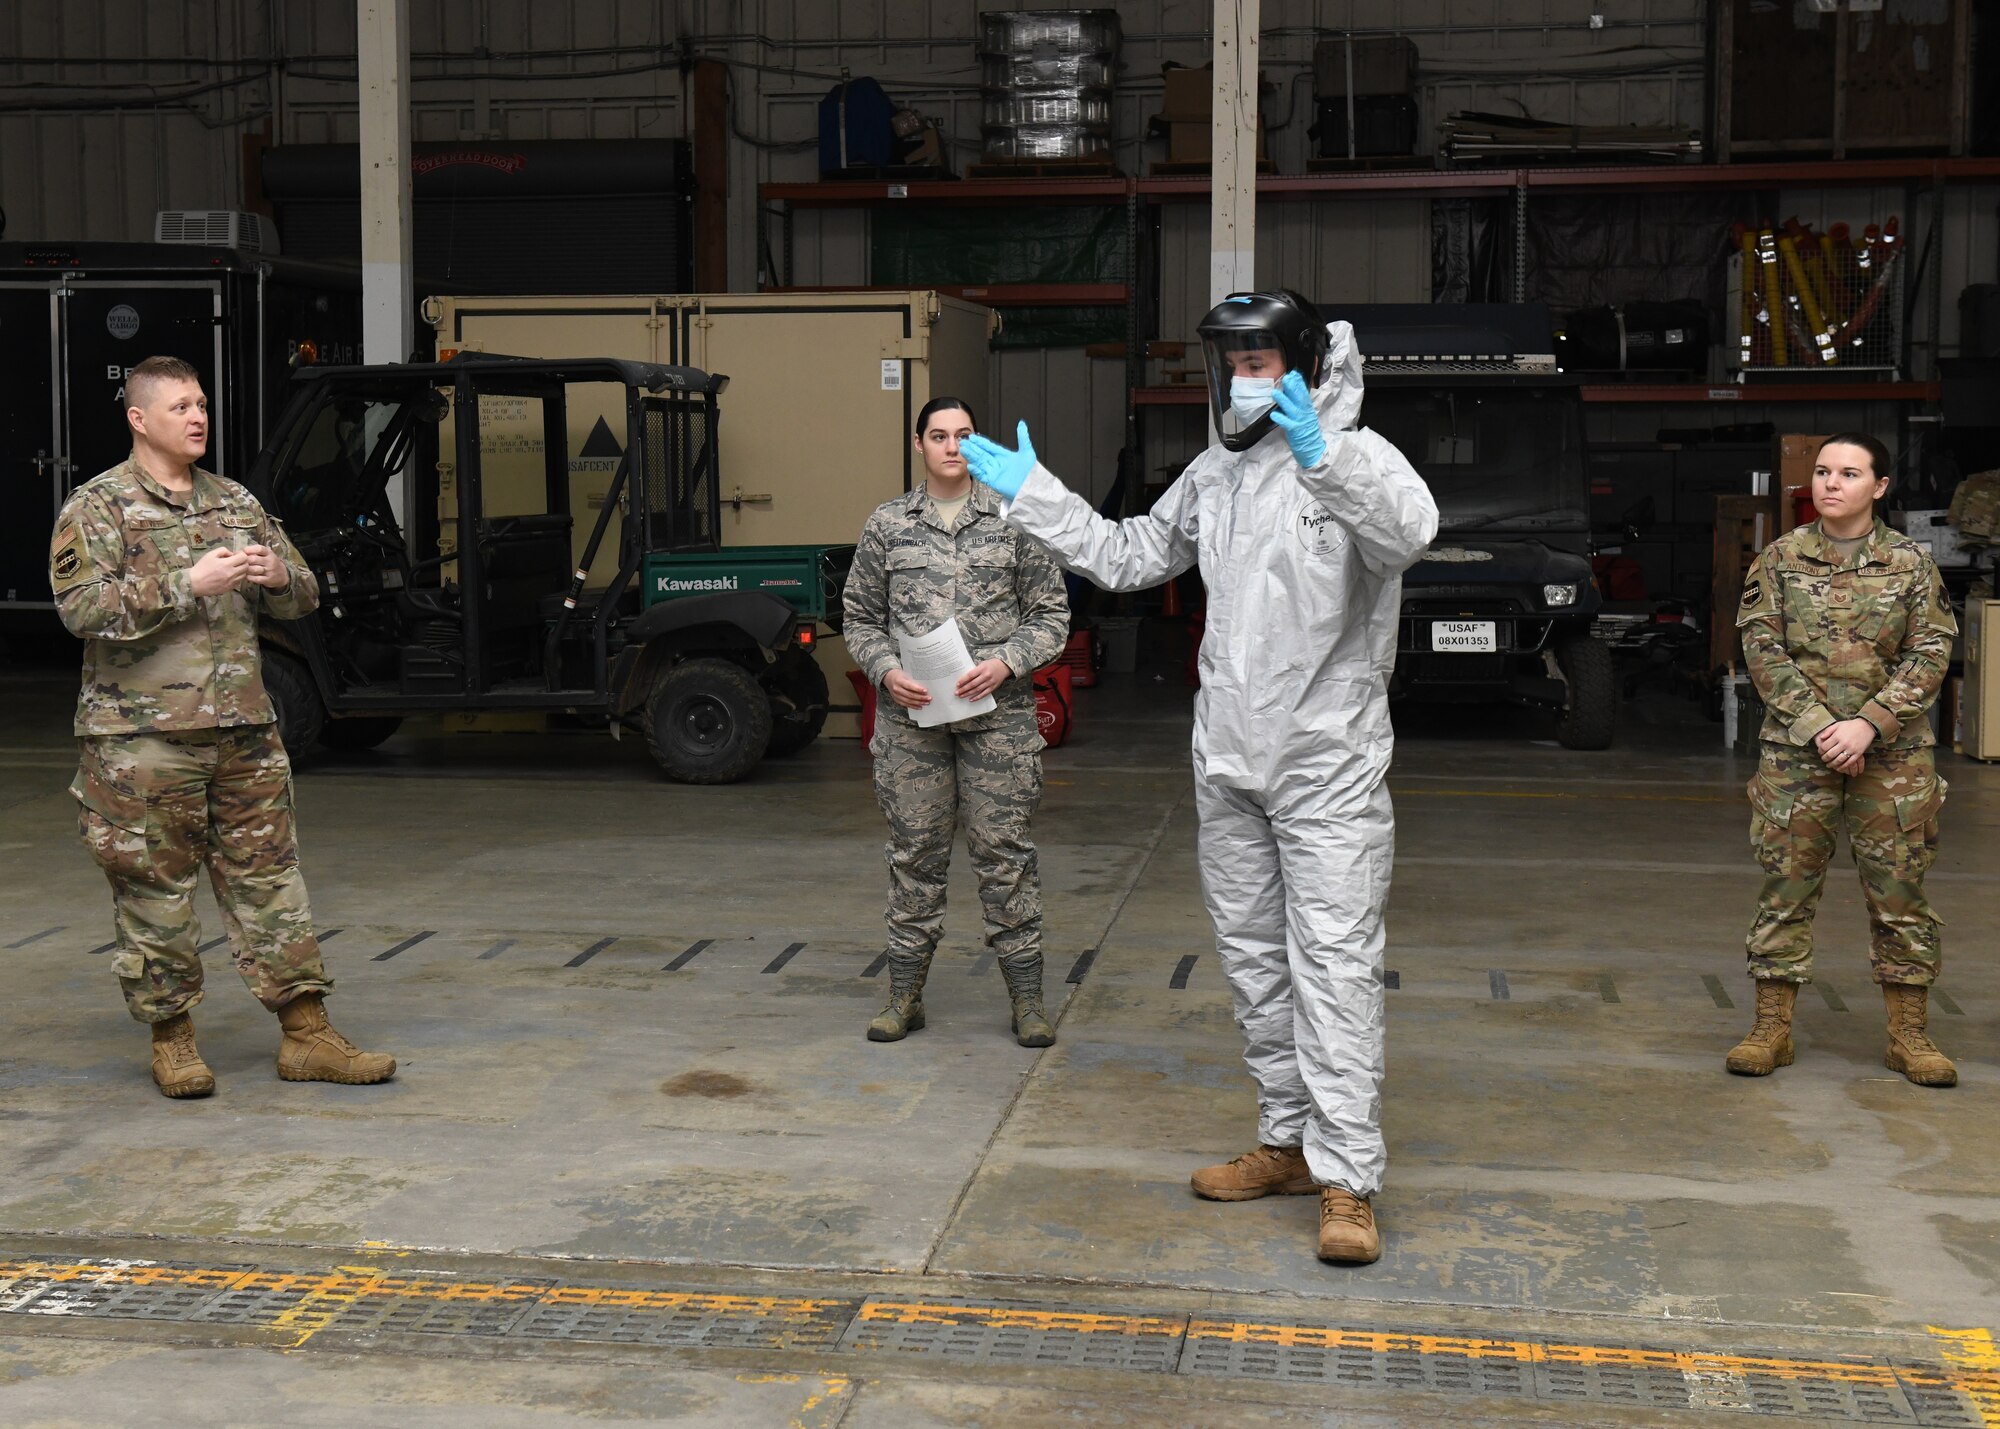 Senior Airman Dennis McAnnally, 9th Operational Medical Readiness Squadron Bioenviromental Engineering technician, center right, demonstrates how to properly don personal protective equipment, Mar. 28, 2020 at Beale Air Force Base, California. The training was provided to prepare Airmen for COVID-19 response efforts. (U.S. Air Force photo by Airman 1st Class Luis A. Ruiz-Vazquez)